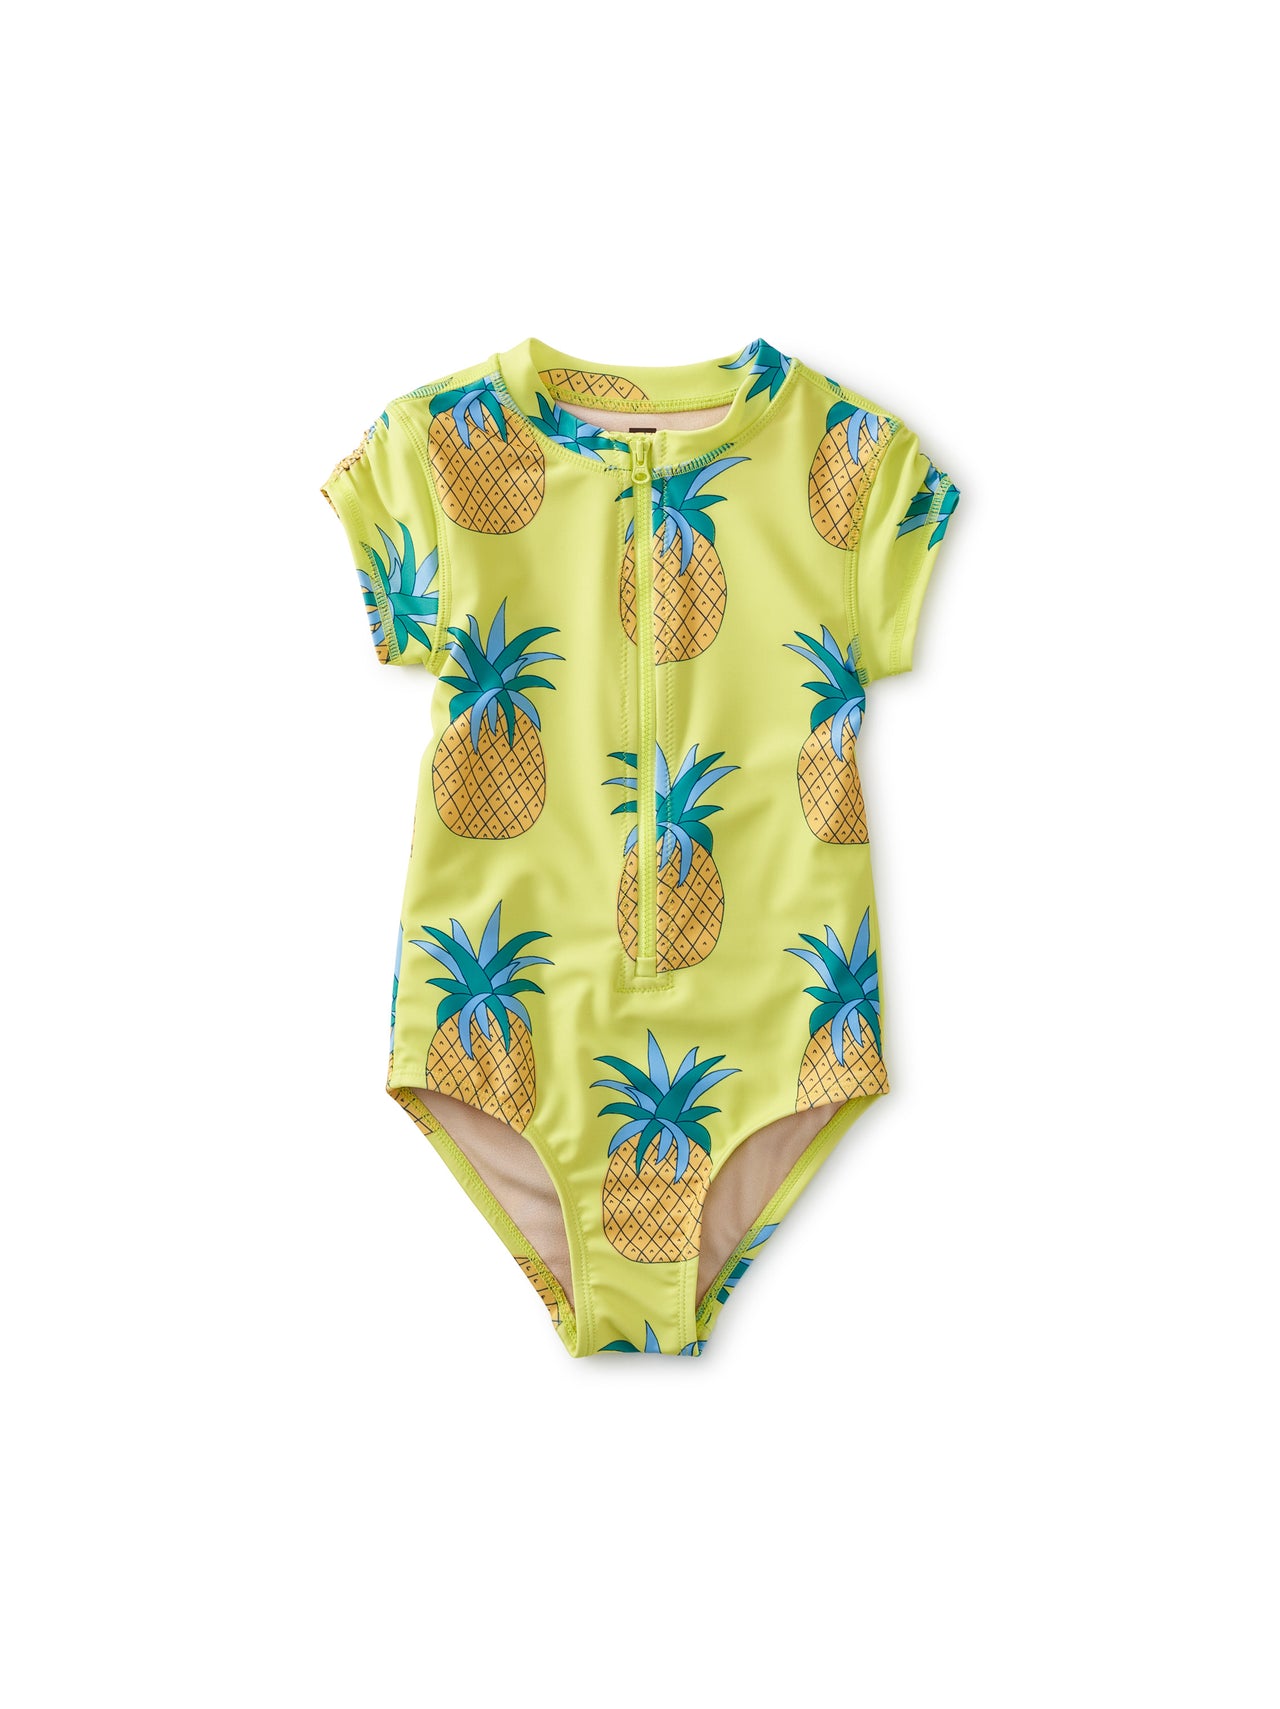 Rash Guard One-Piece Swimsuit- Pineapple Parade in Yellow